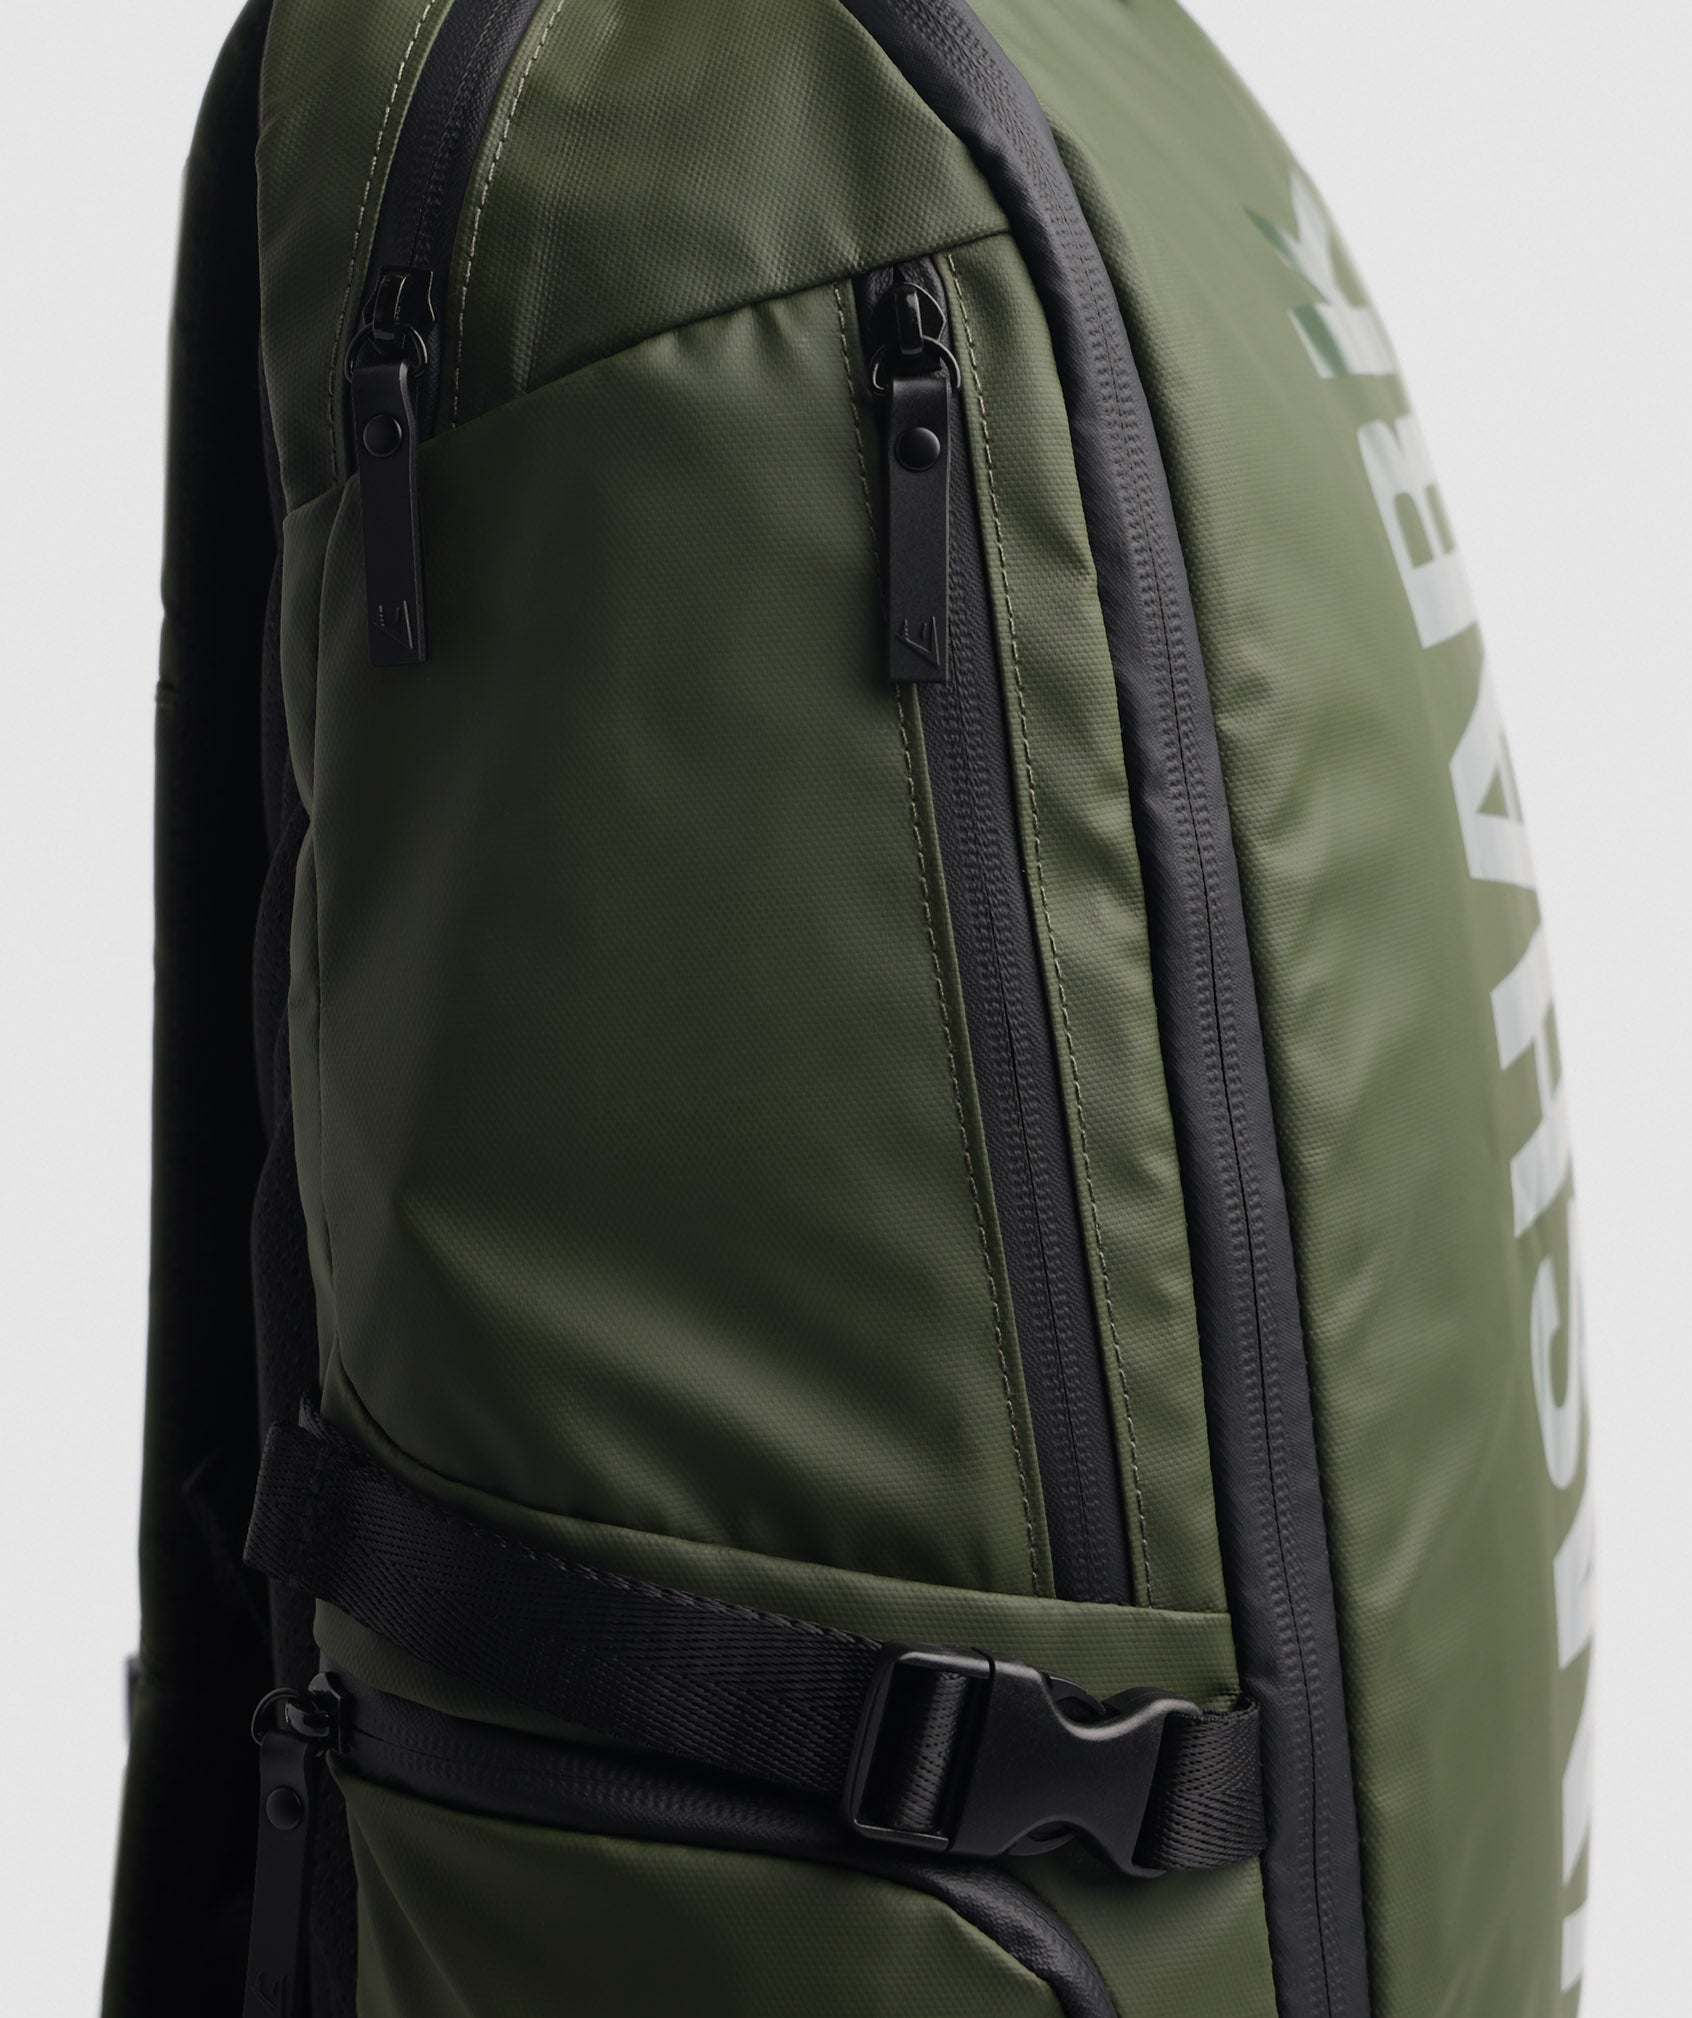 X-Series Bag 0.3 in Core Olive